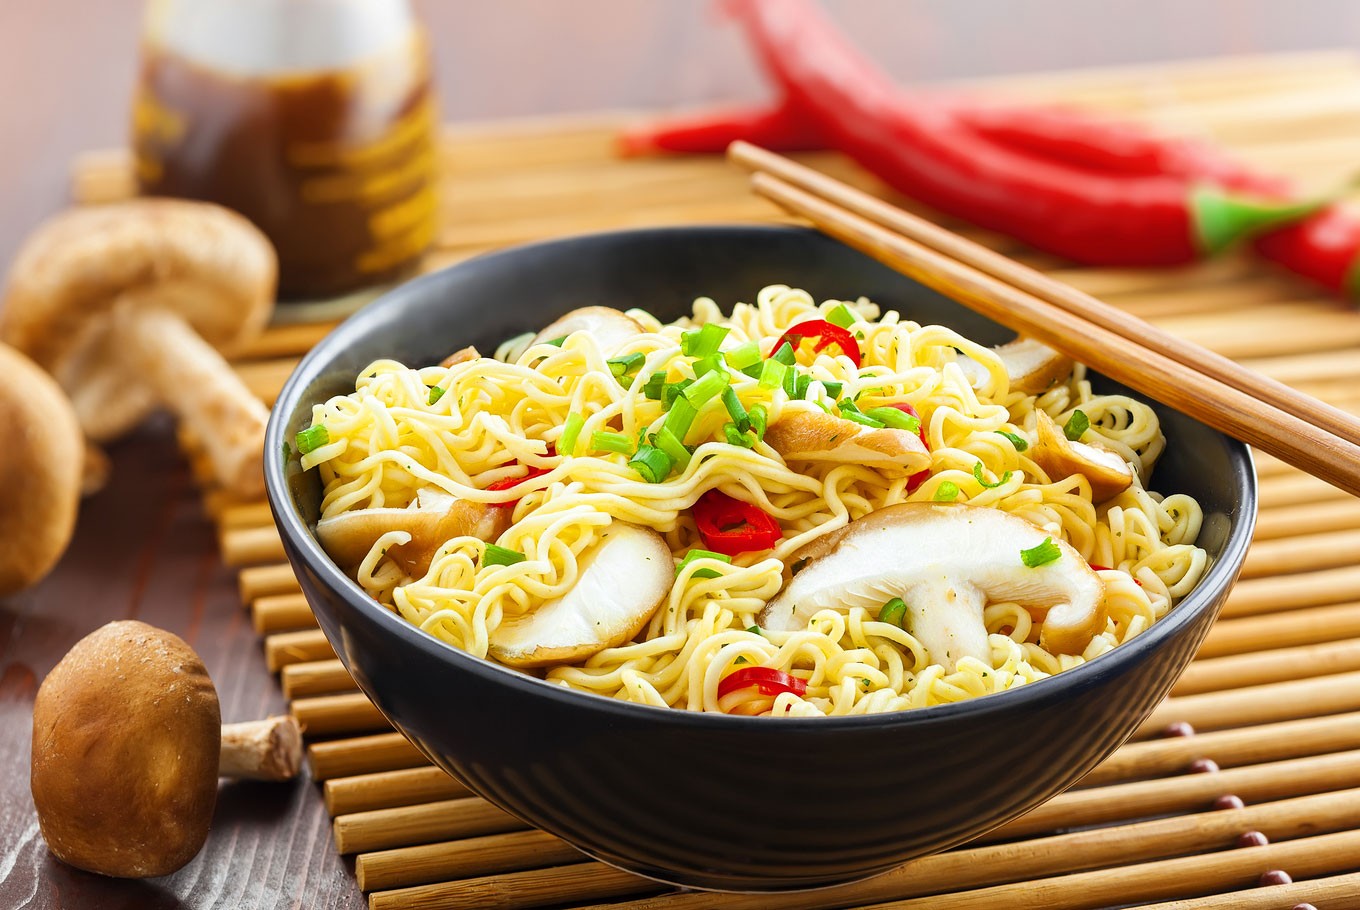 Rice vs noodles: Which is healthier? - Health - The Jakarta Post